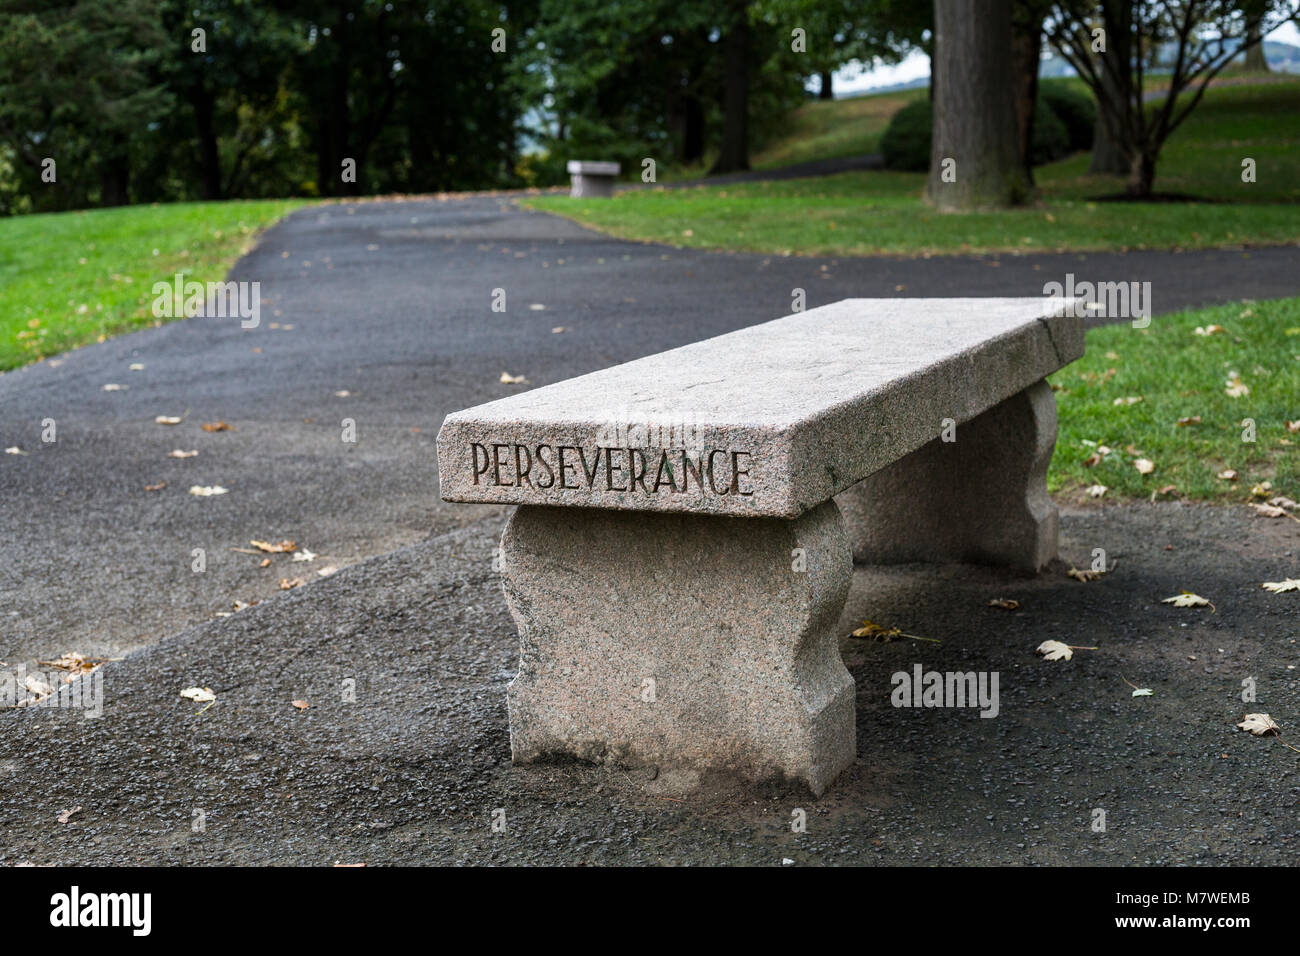 New York, USA.  Bench Inscription at Trophy Point, West Point Military Academy:  Perseverance. Stock Photo